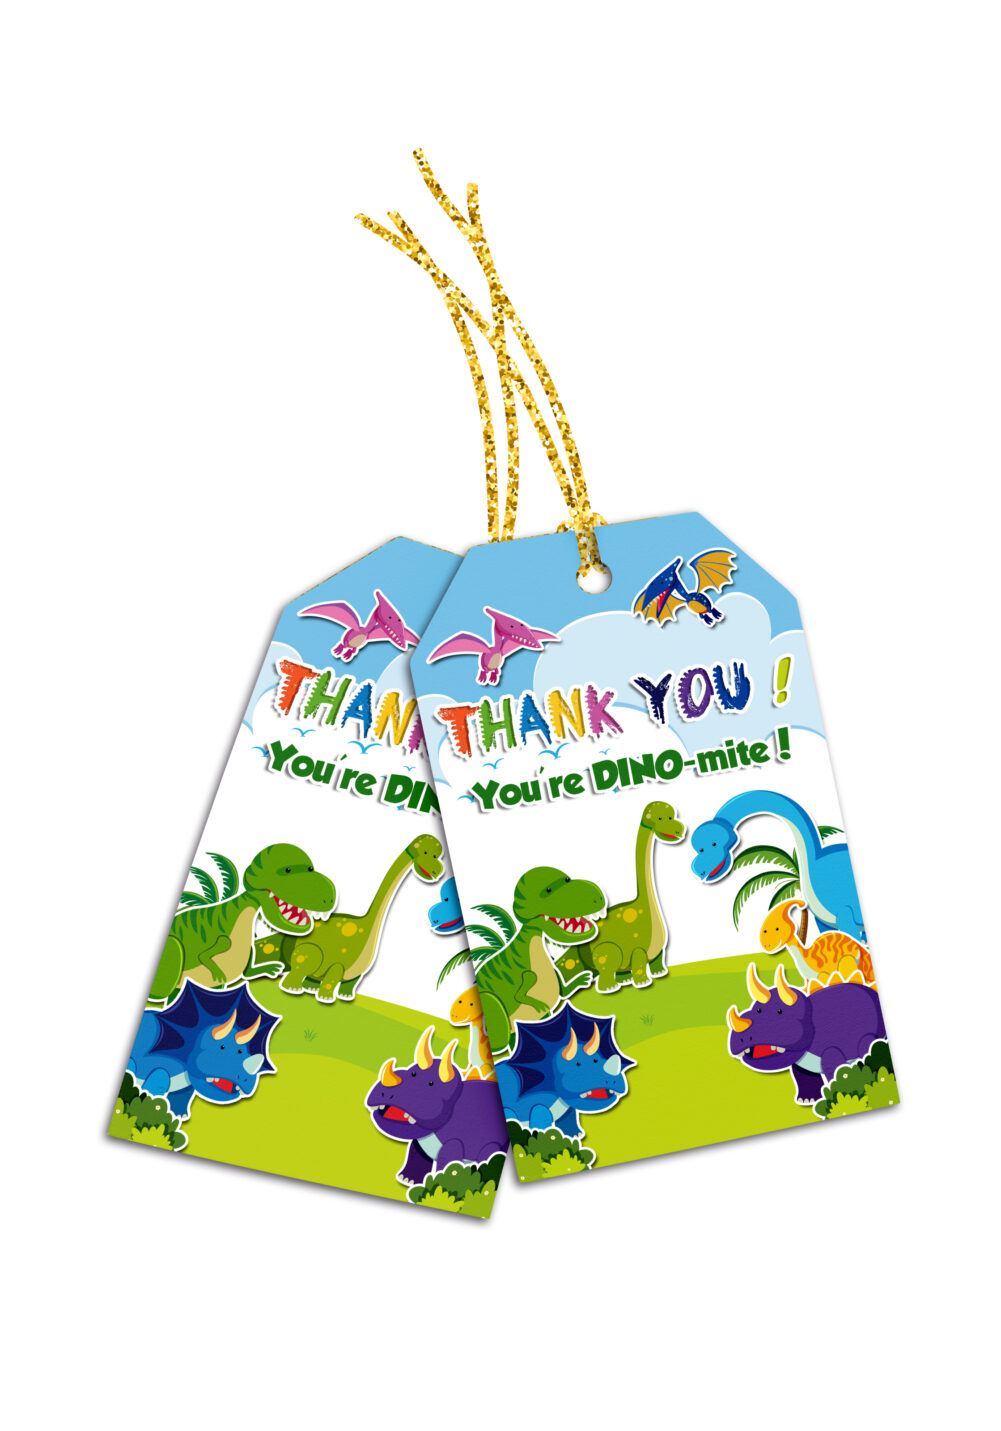 dinosaur theme thank you cards for return gifts